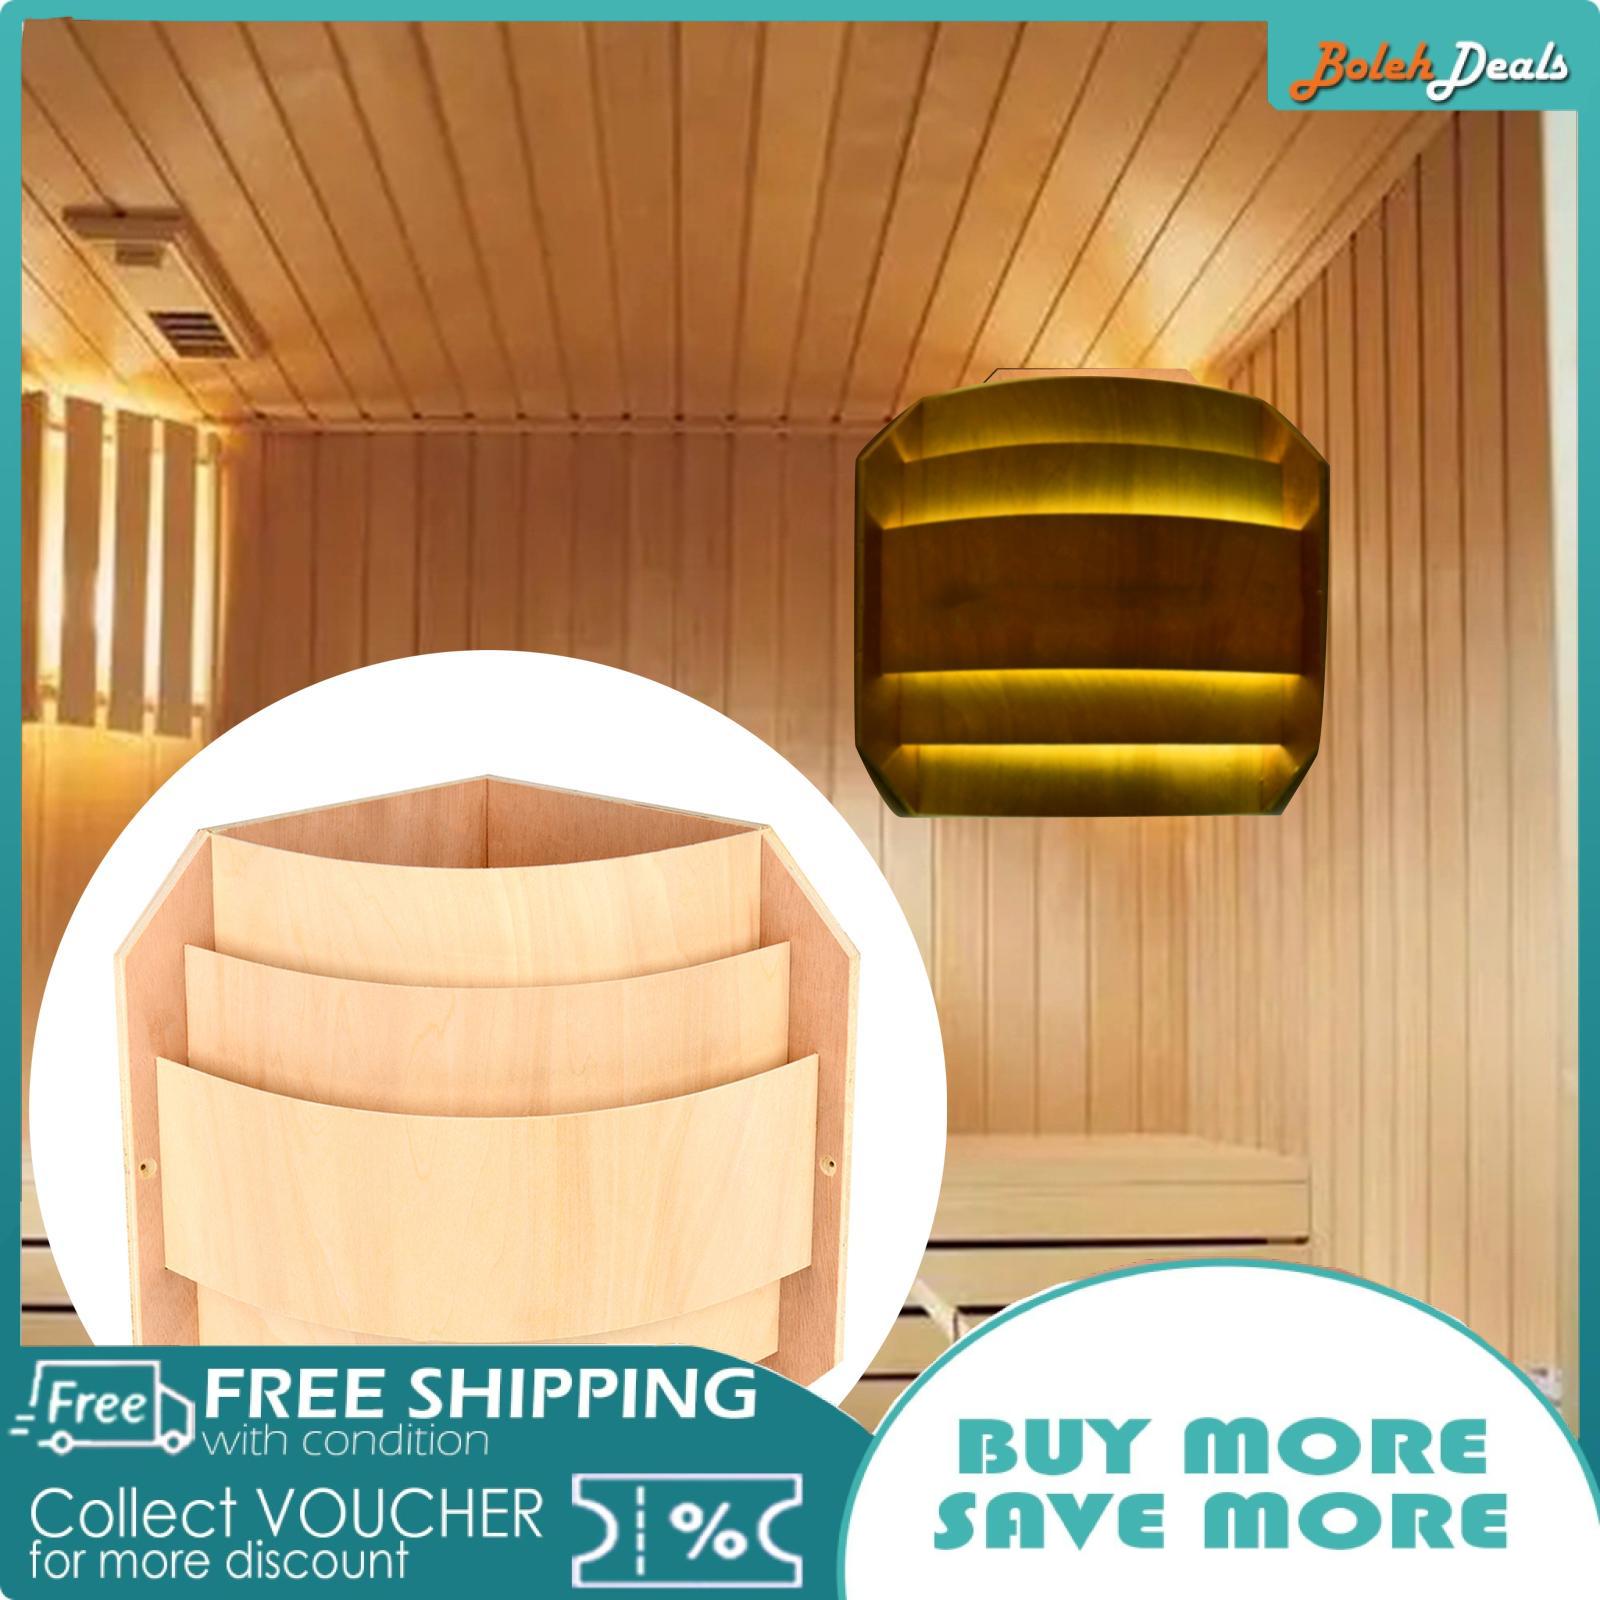 BolehDeals Steam Room Lampshade Cover Wooden for SPA Decor High